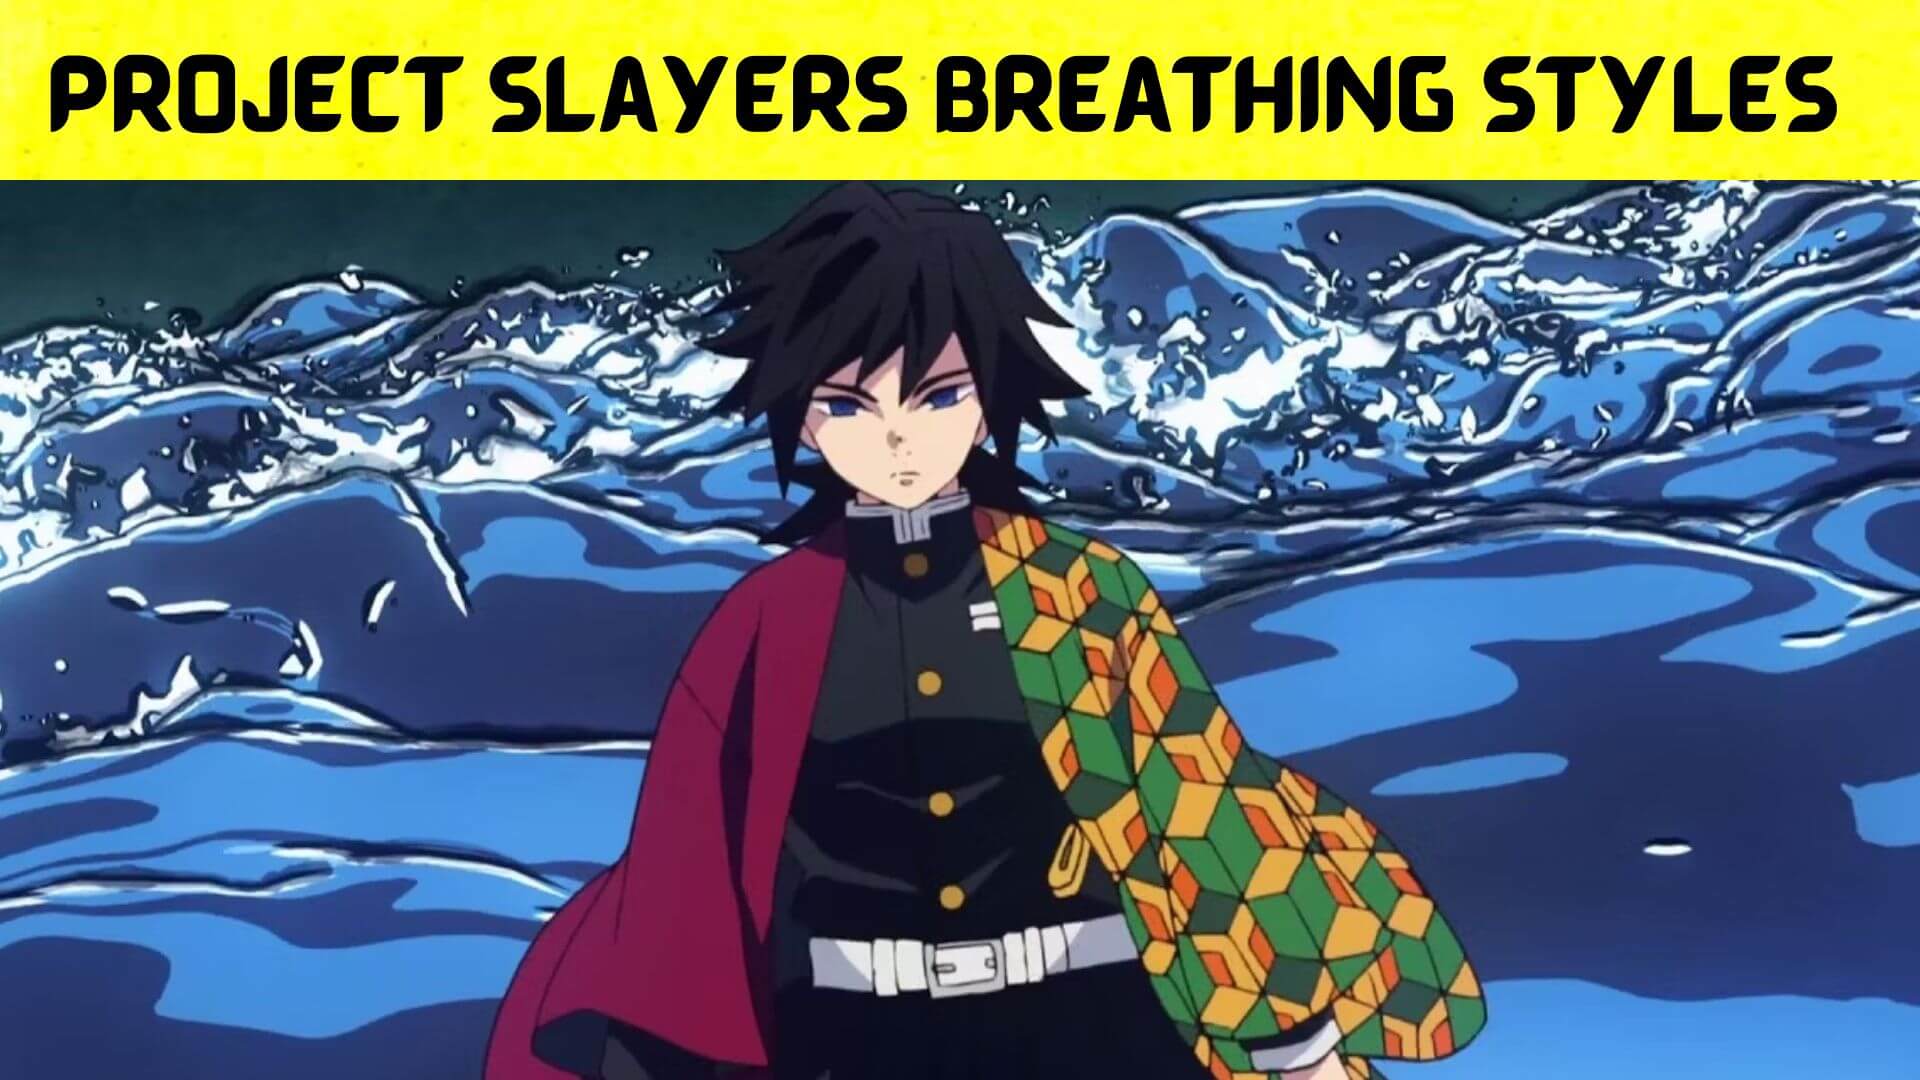 Project Slayers Breathing Styles